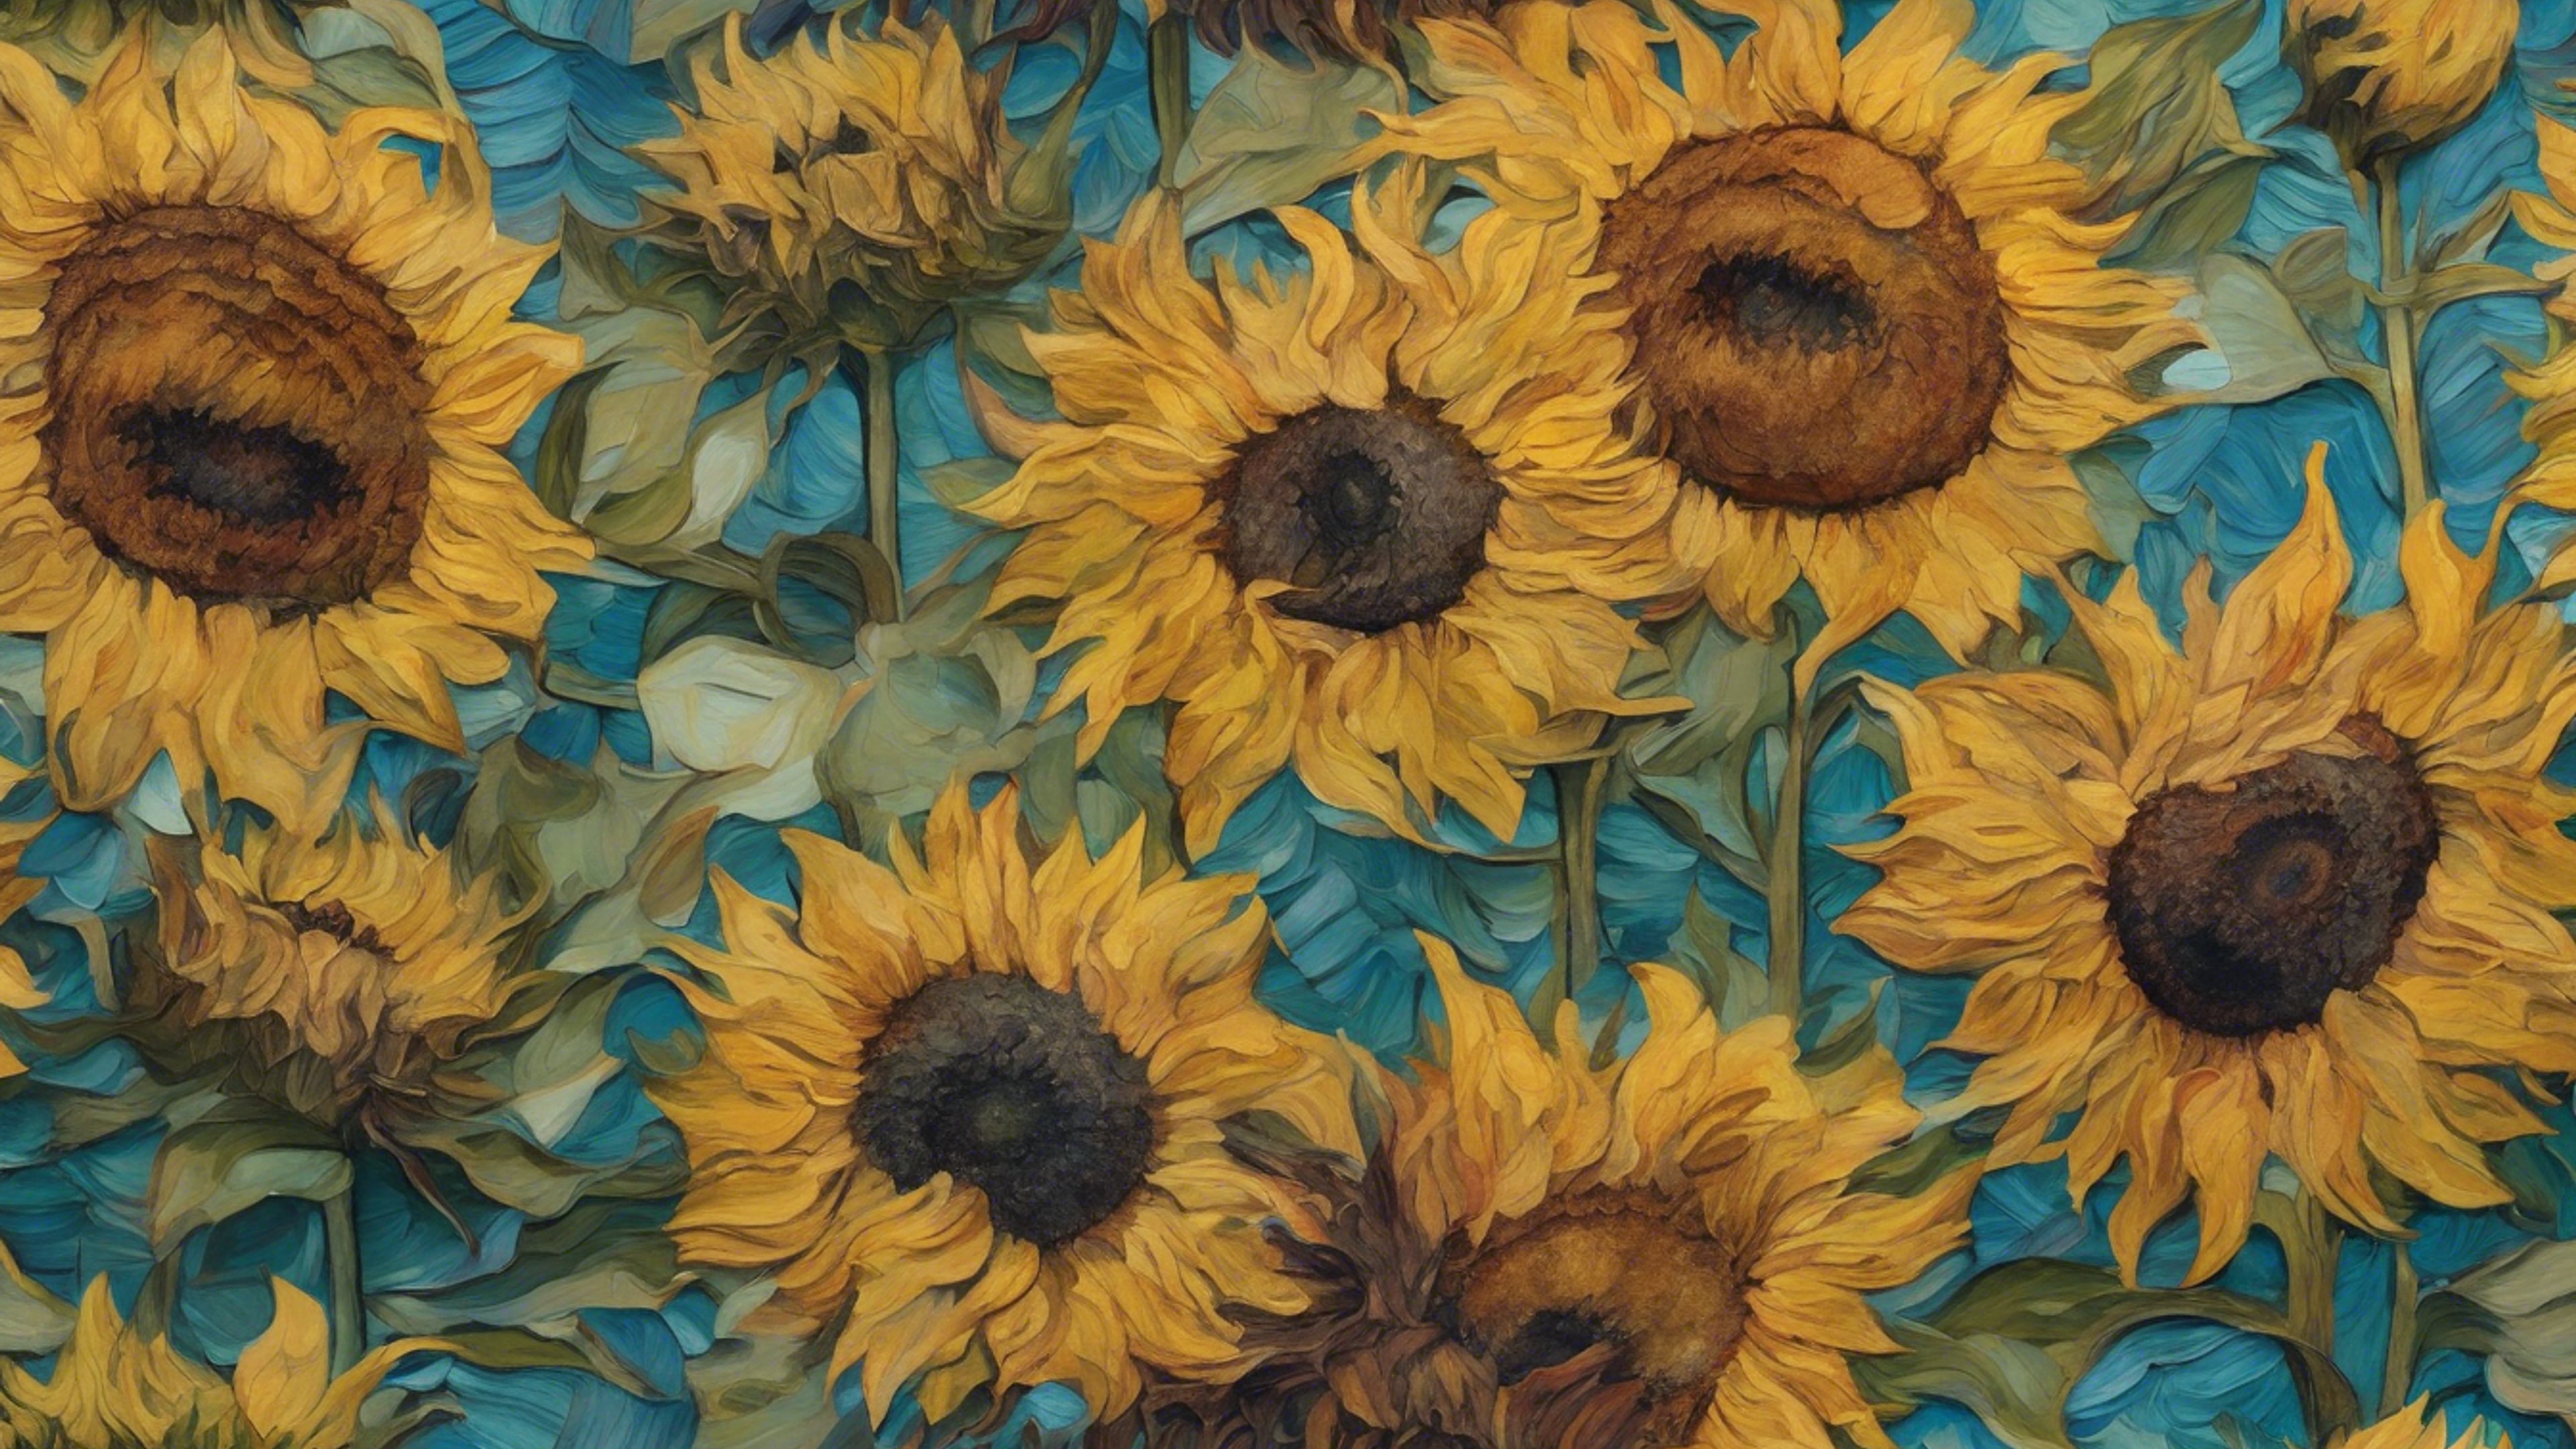 A floral mural in the style of van Gogh's 'Sunflowers', covering an entire wall.壁紙[a8d1e7a2ea8b4acaa57b]